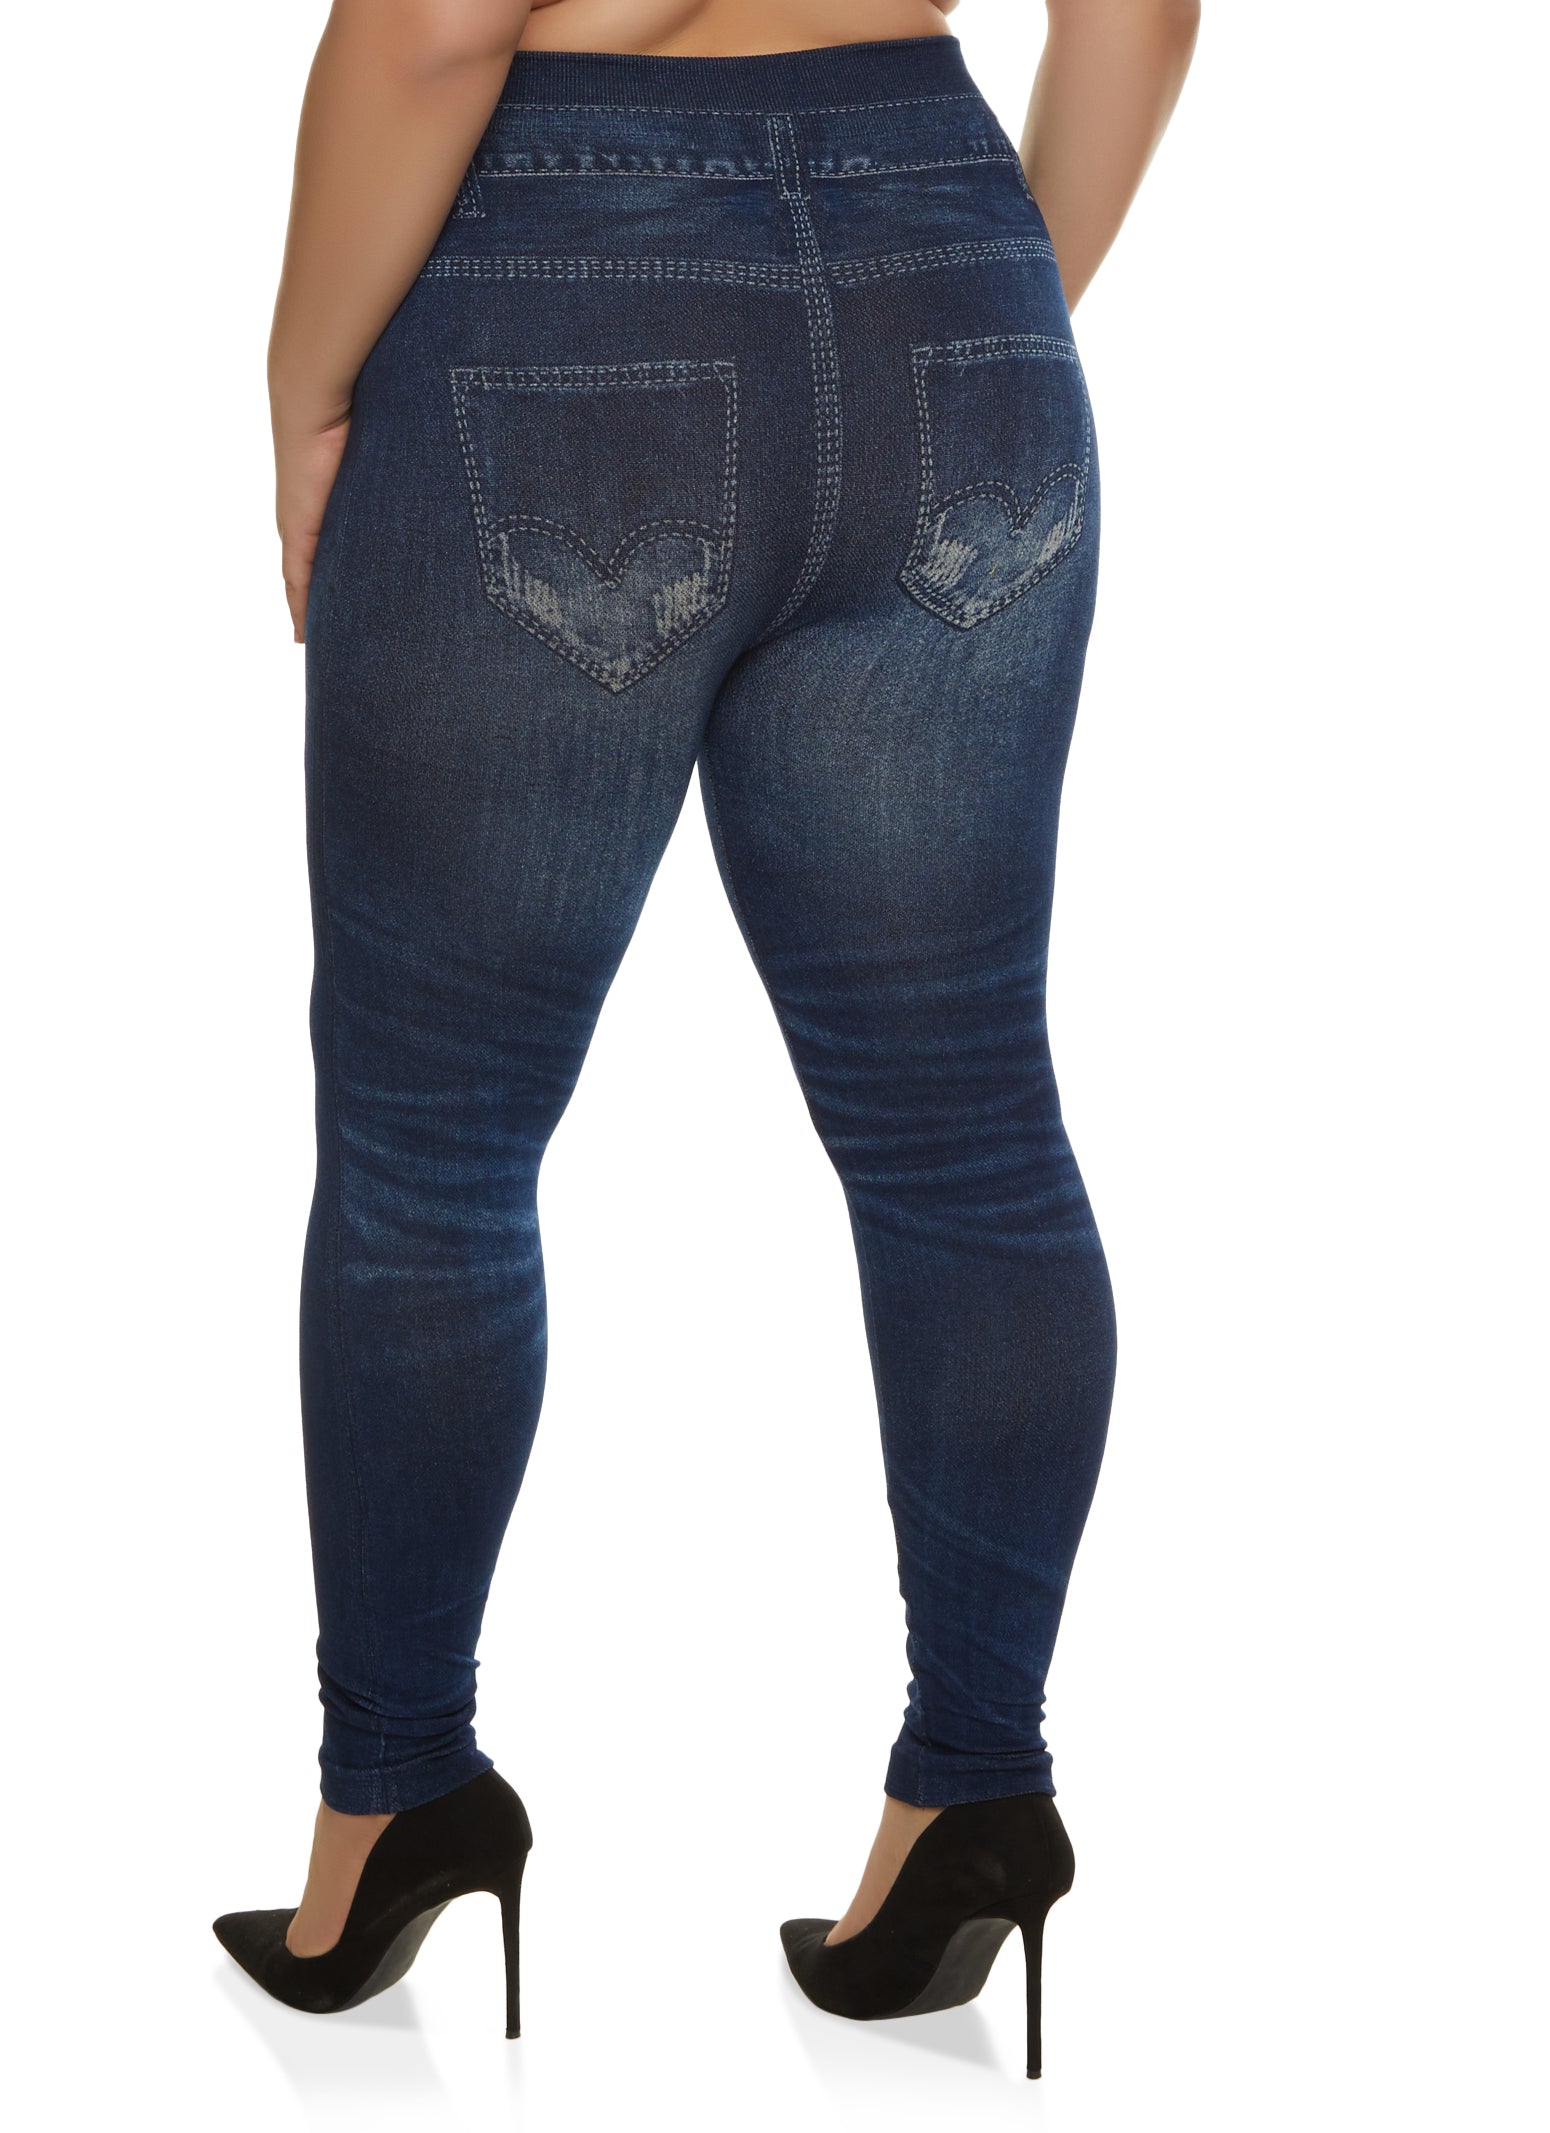 Buy Plus Size Full Length Jeggings with Pocket Detail and